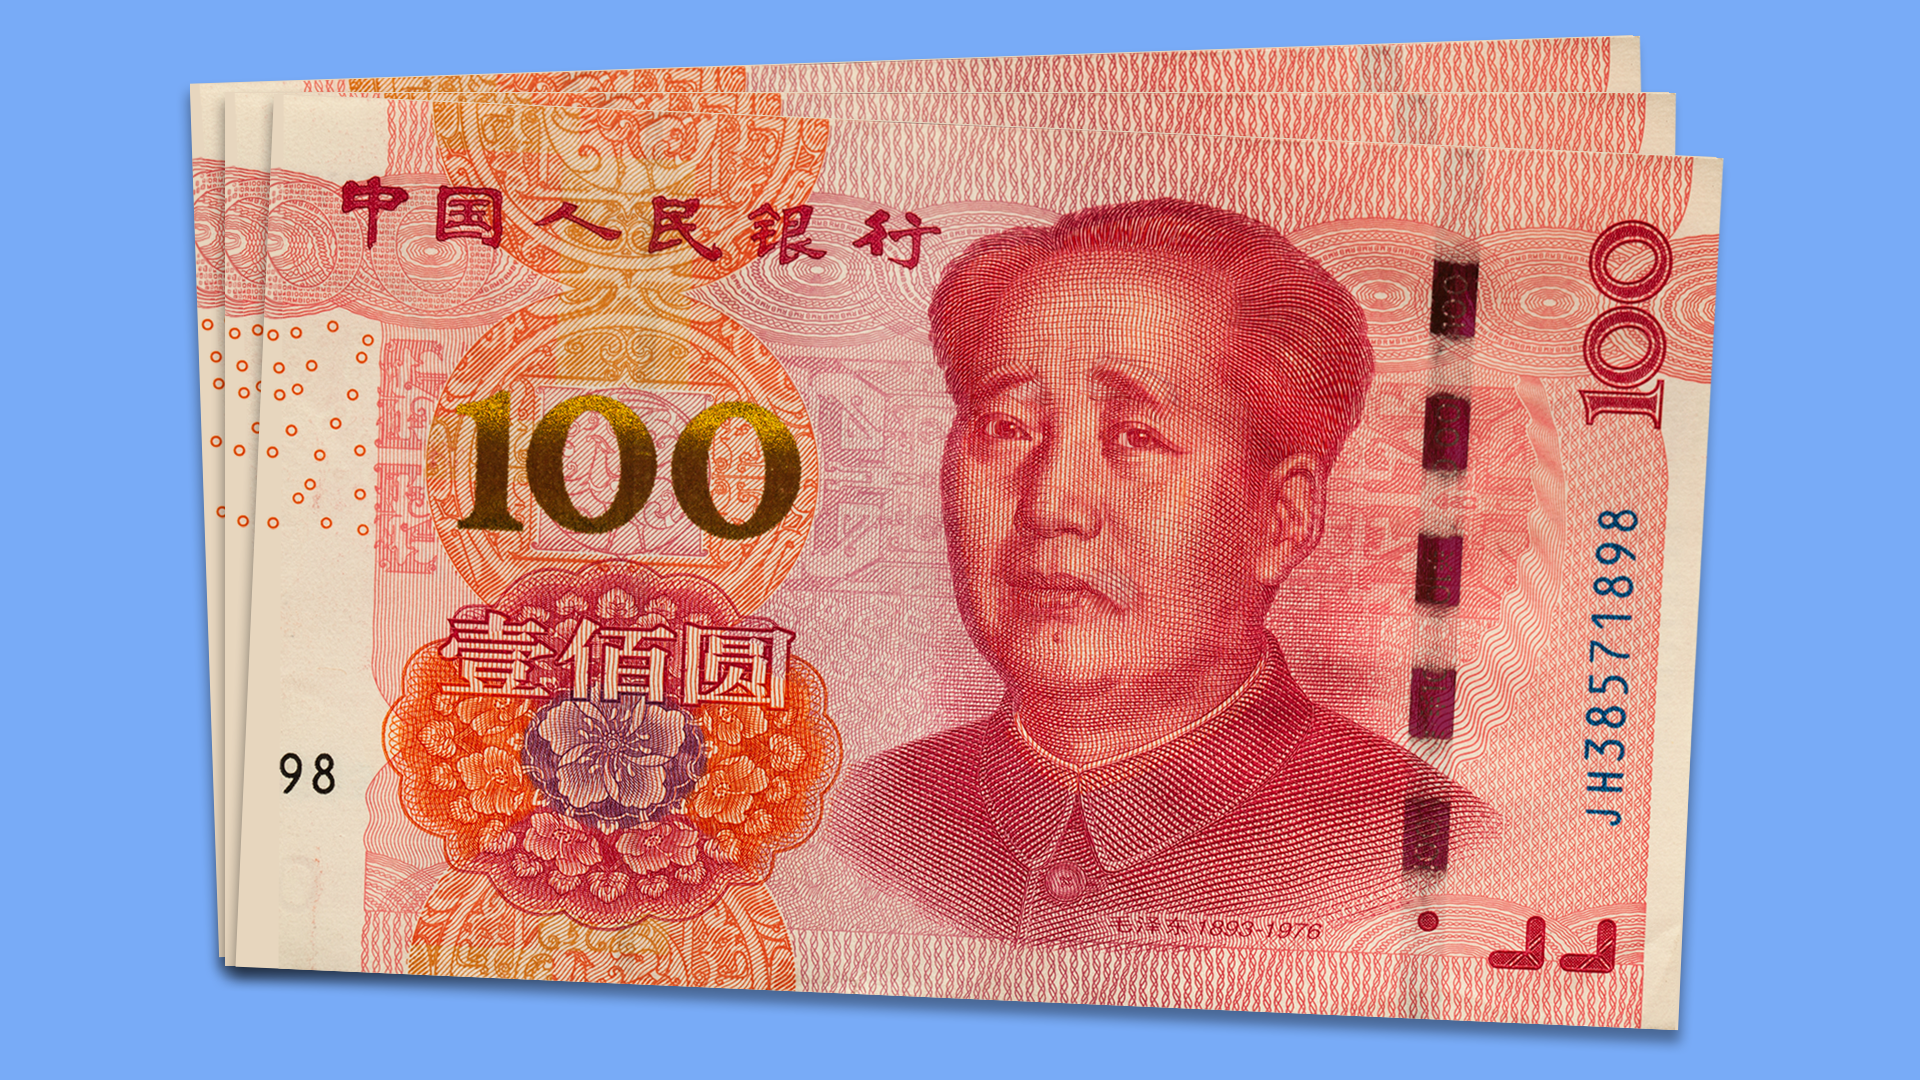 Illustration of a Chinese 100 yuan bill with an unhappy Chairman Mao photo on the bill